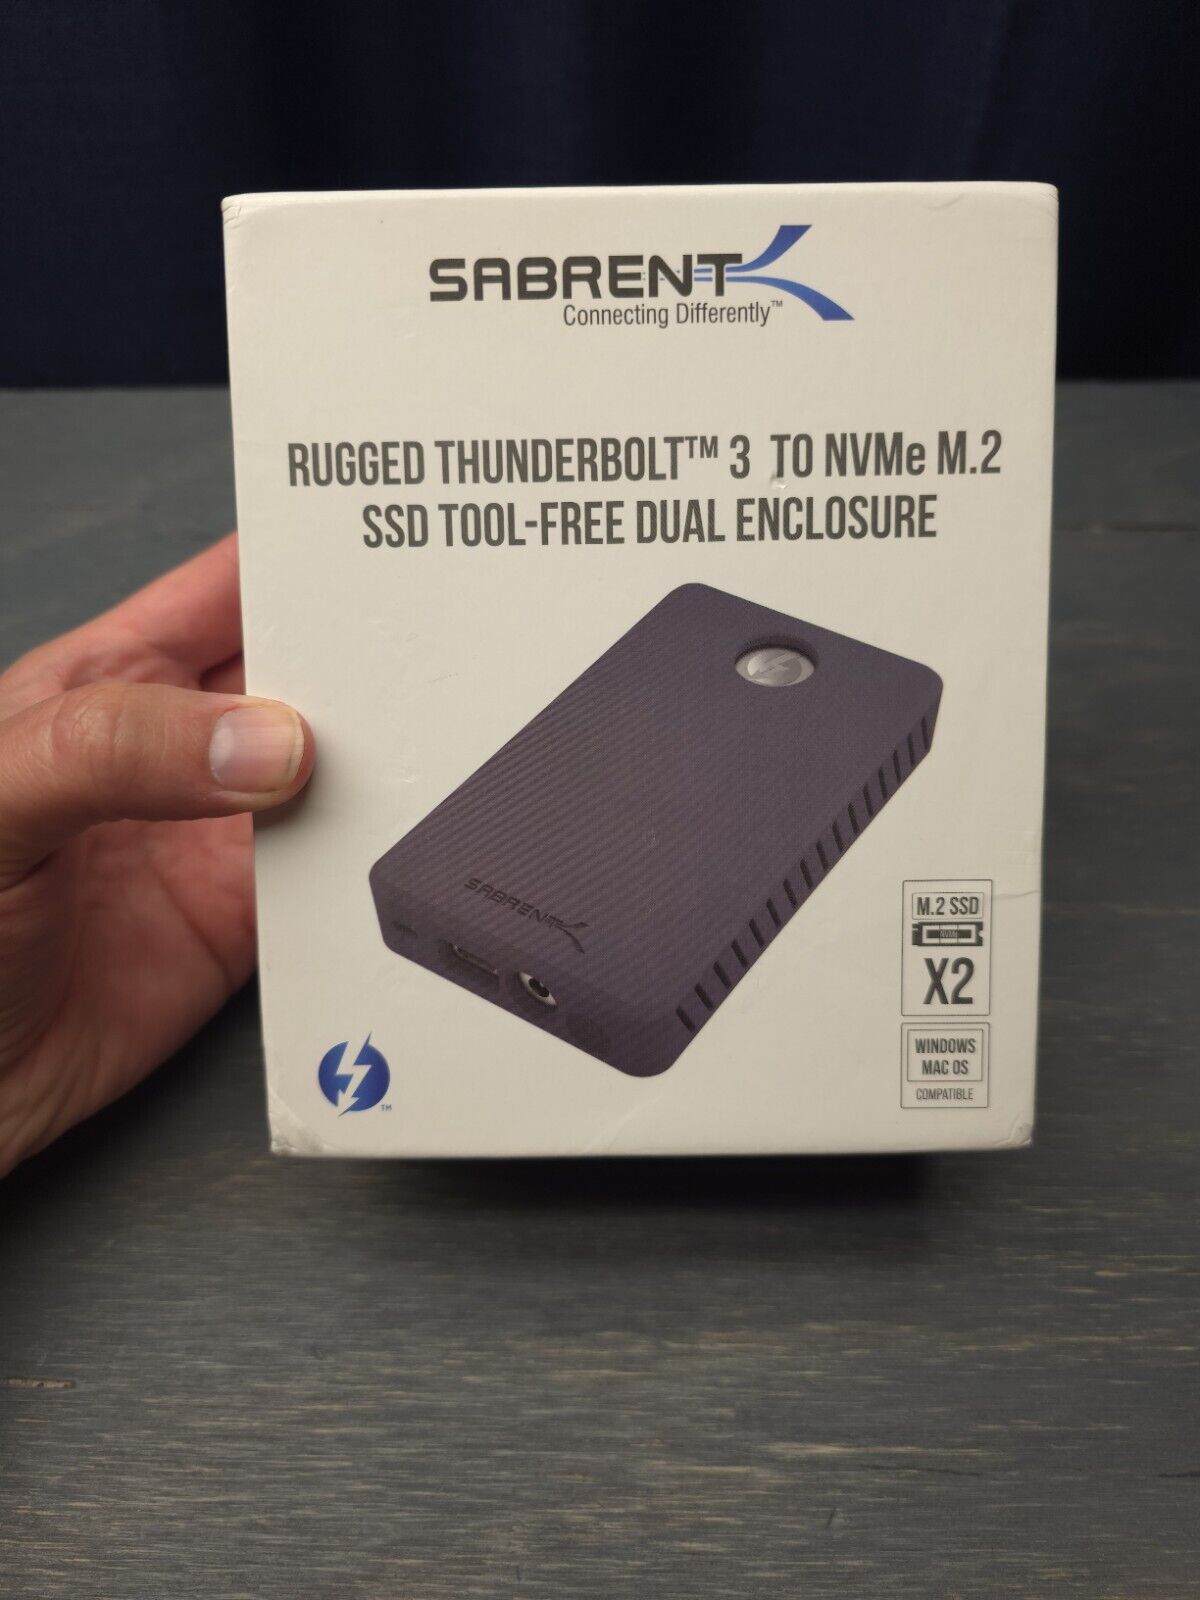 SABRENT Thunderbolt 3 to Dual NVMe M.2 SSD Brand New In Box 